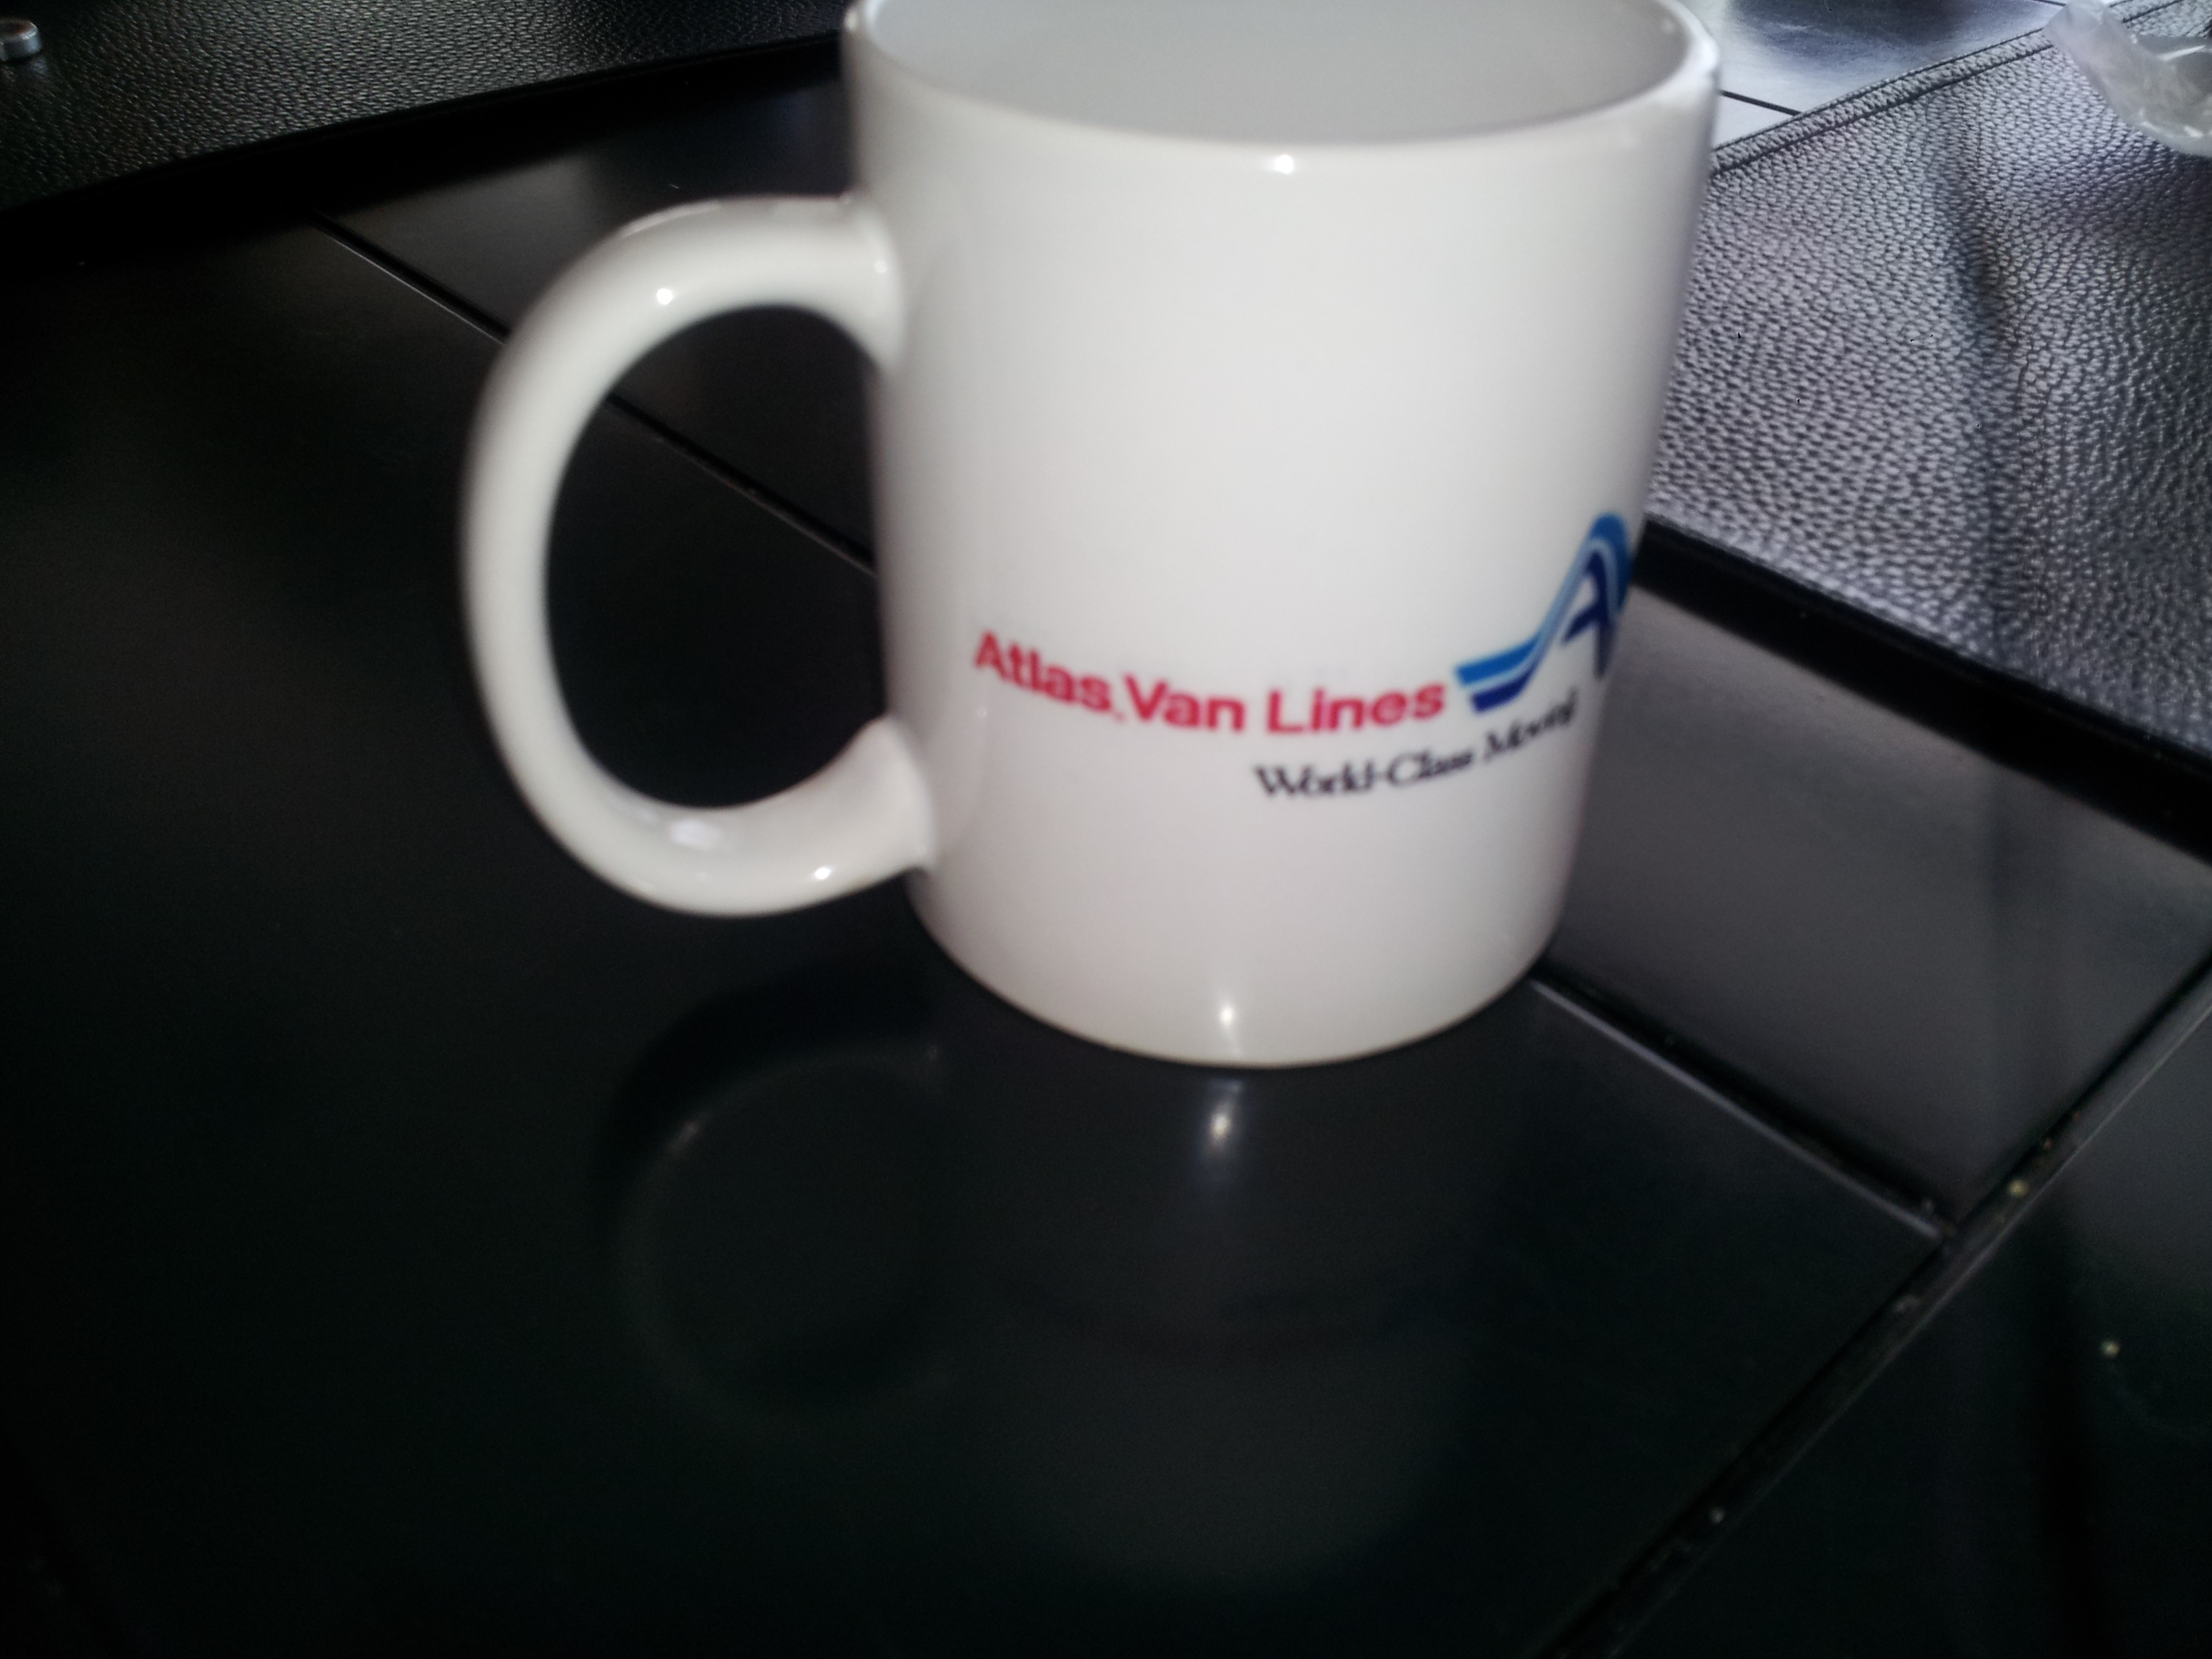 11 ounce Mugs made with sublimation printing